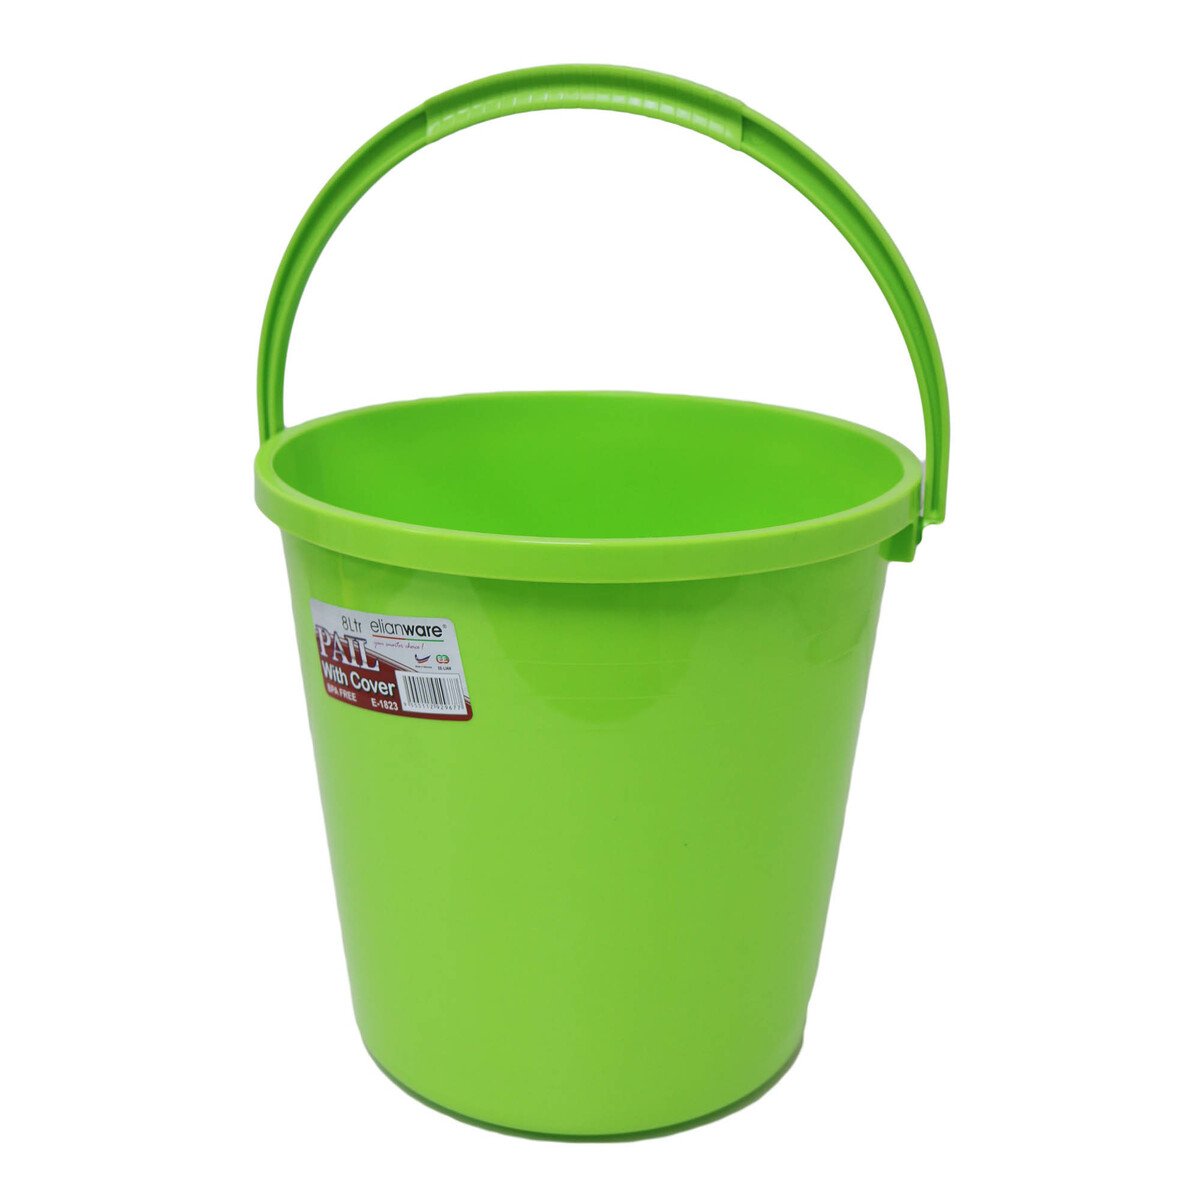 Elianware Pail With Cover 8L 1823-24